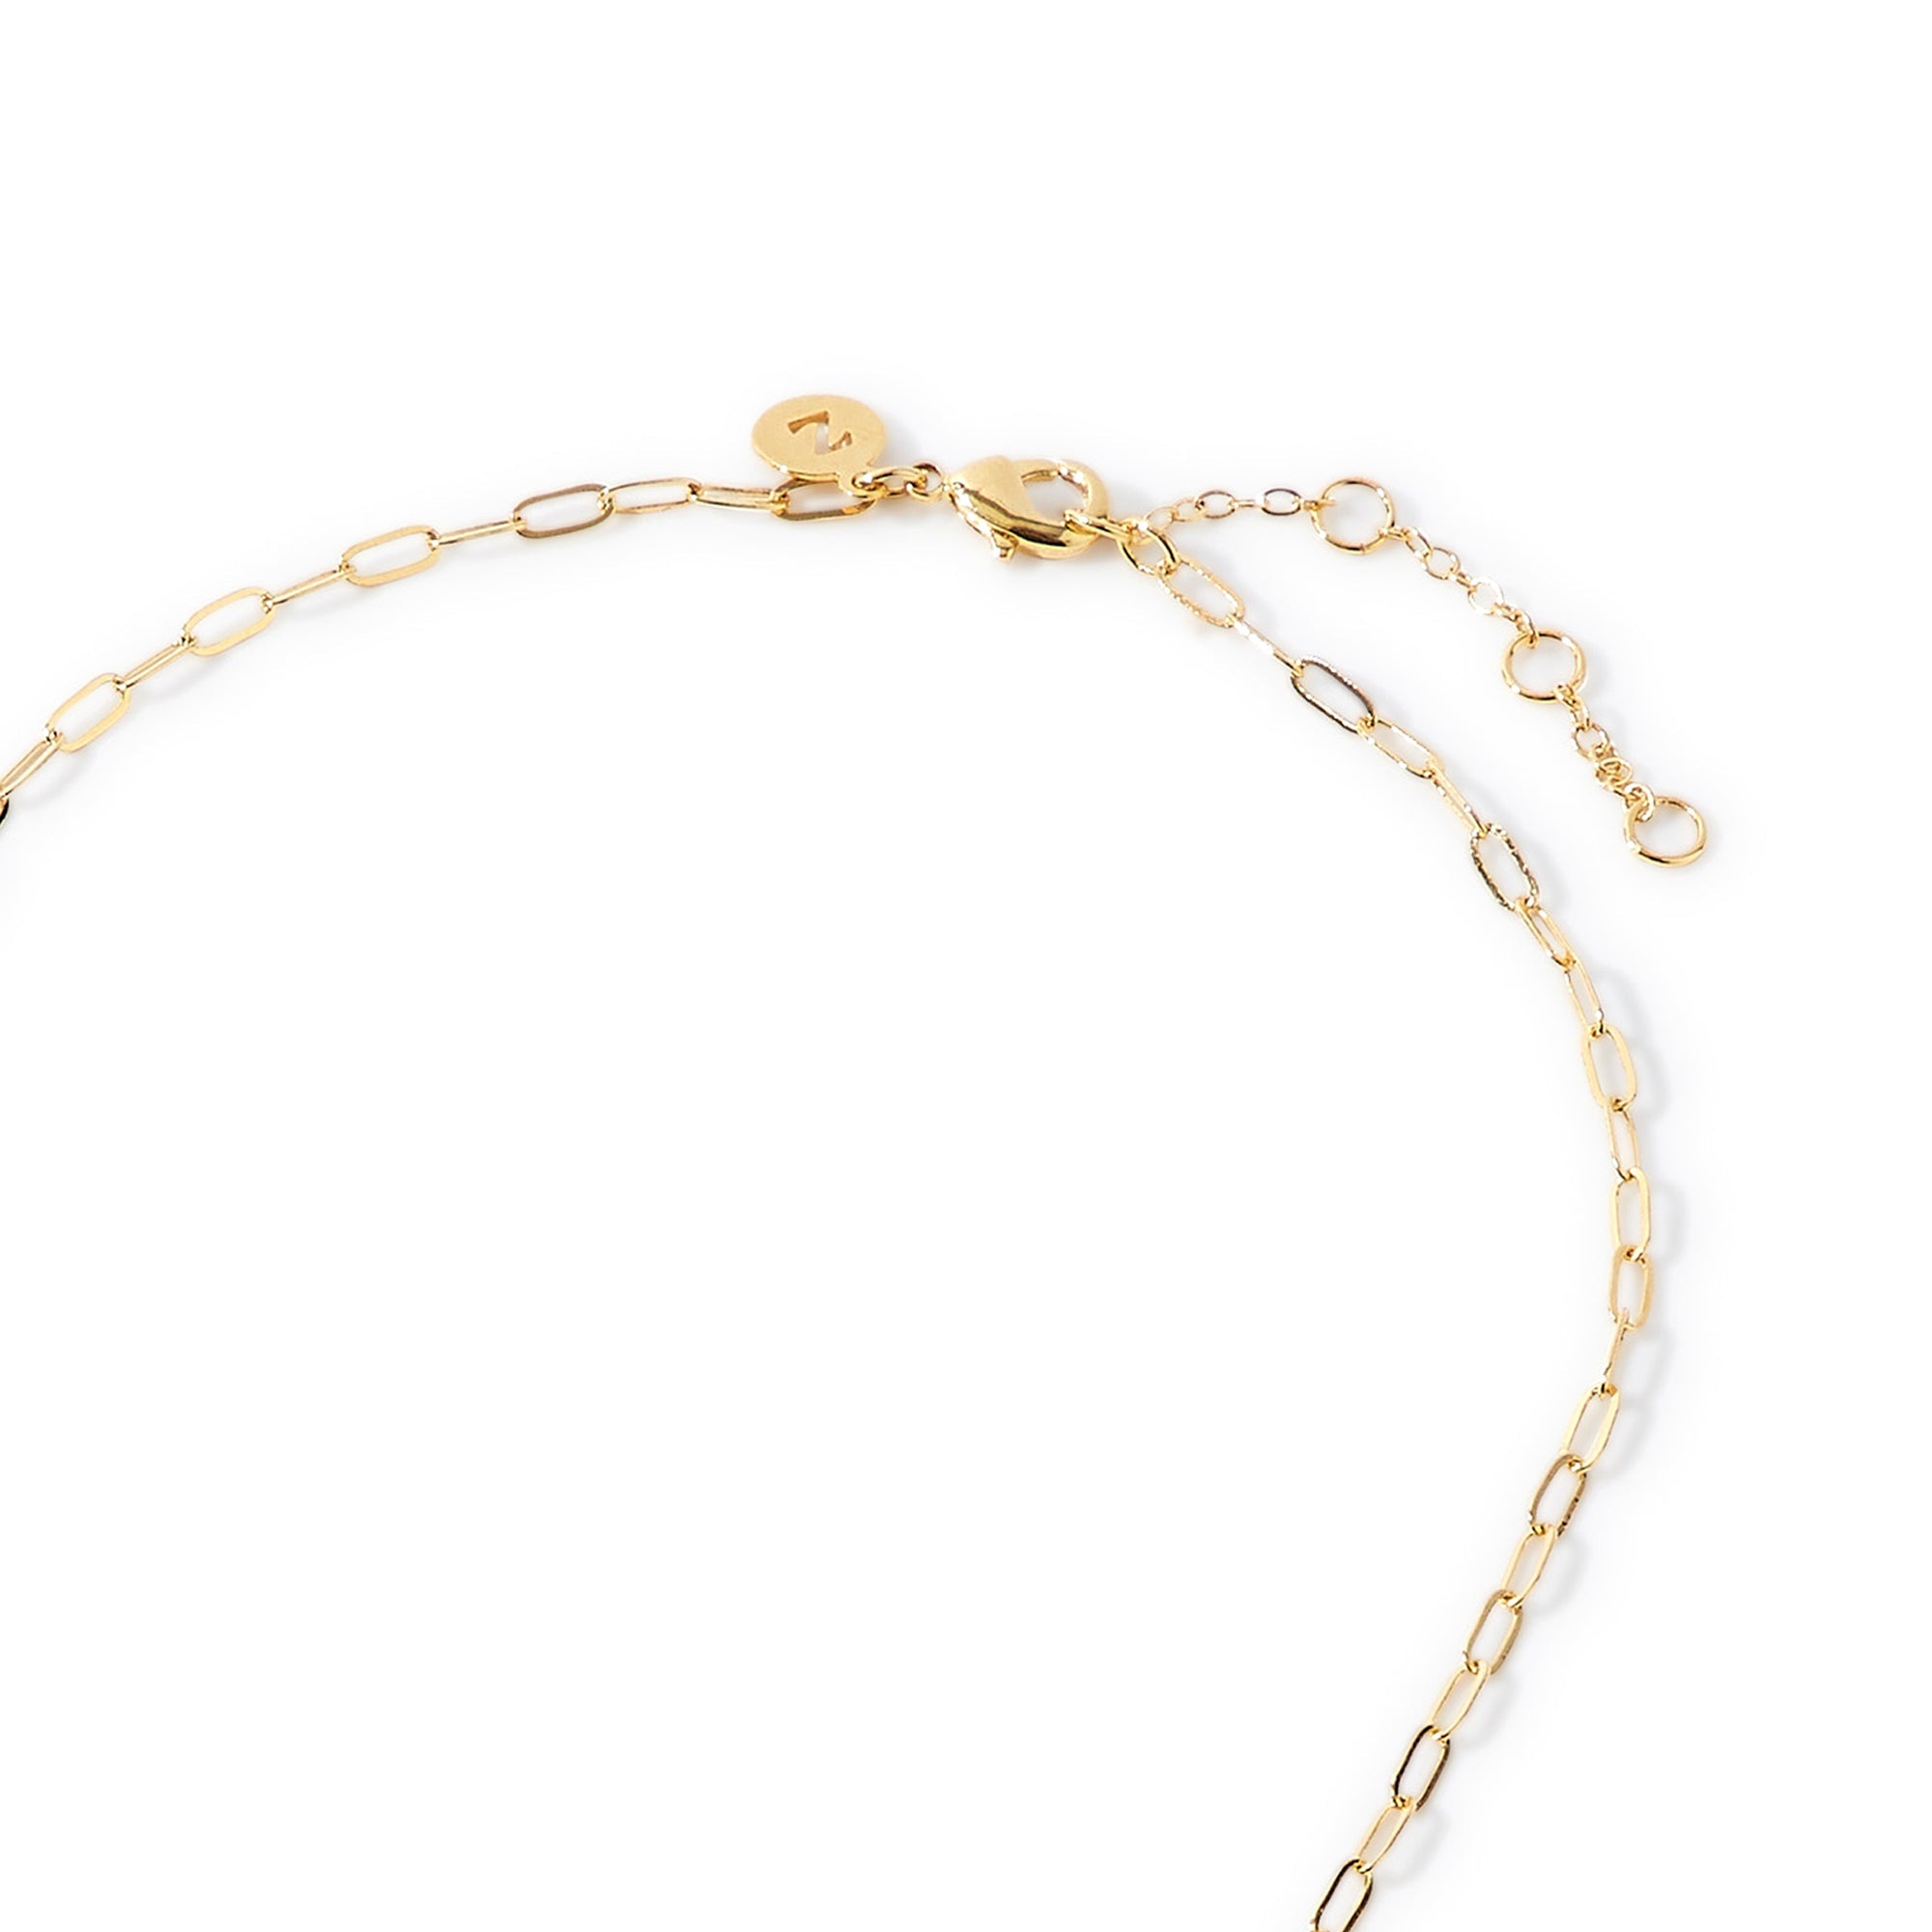 Real Gold Plated Sparkle Station Chain Necklace For Women By Accessorize London